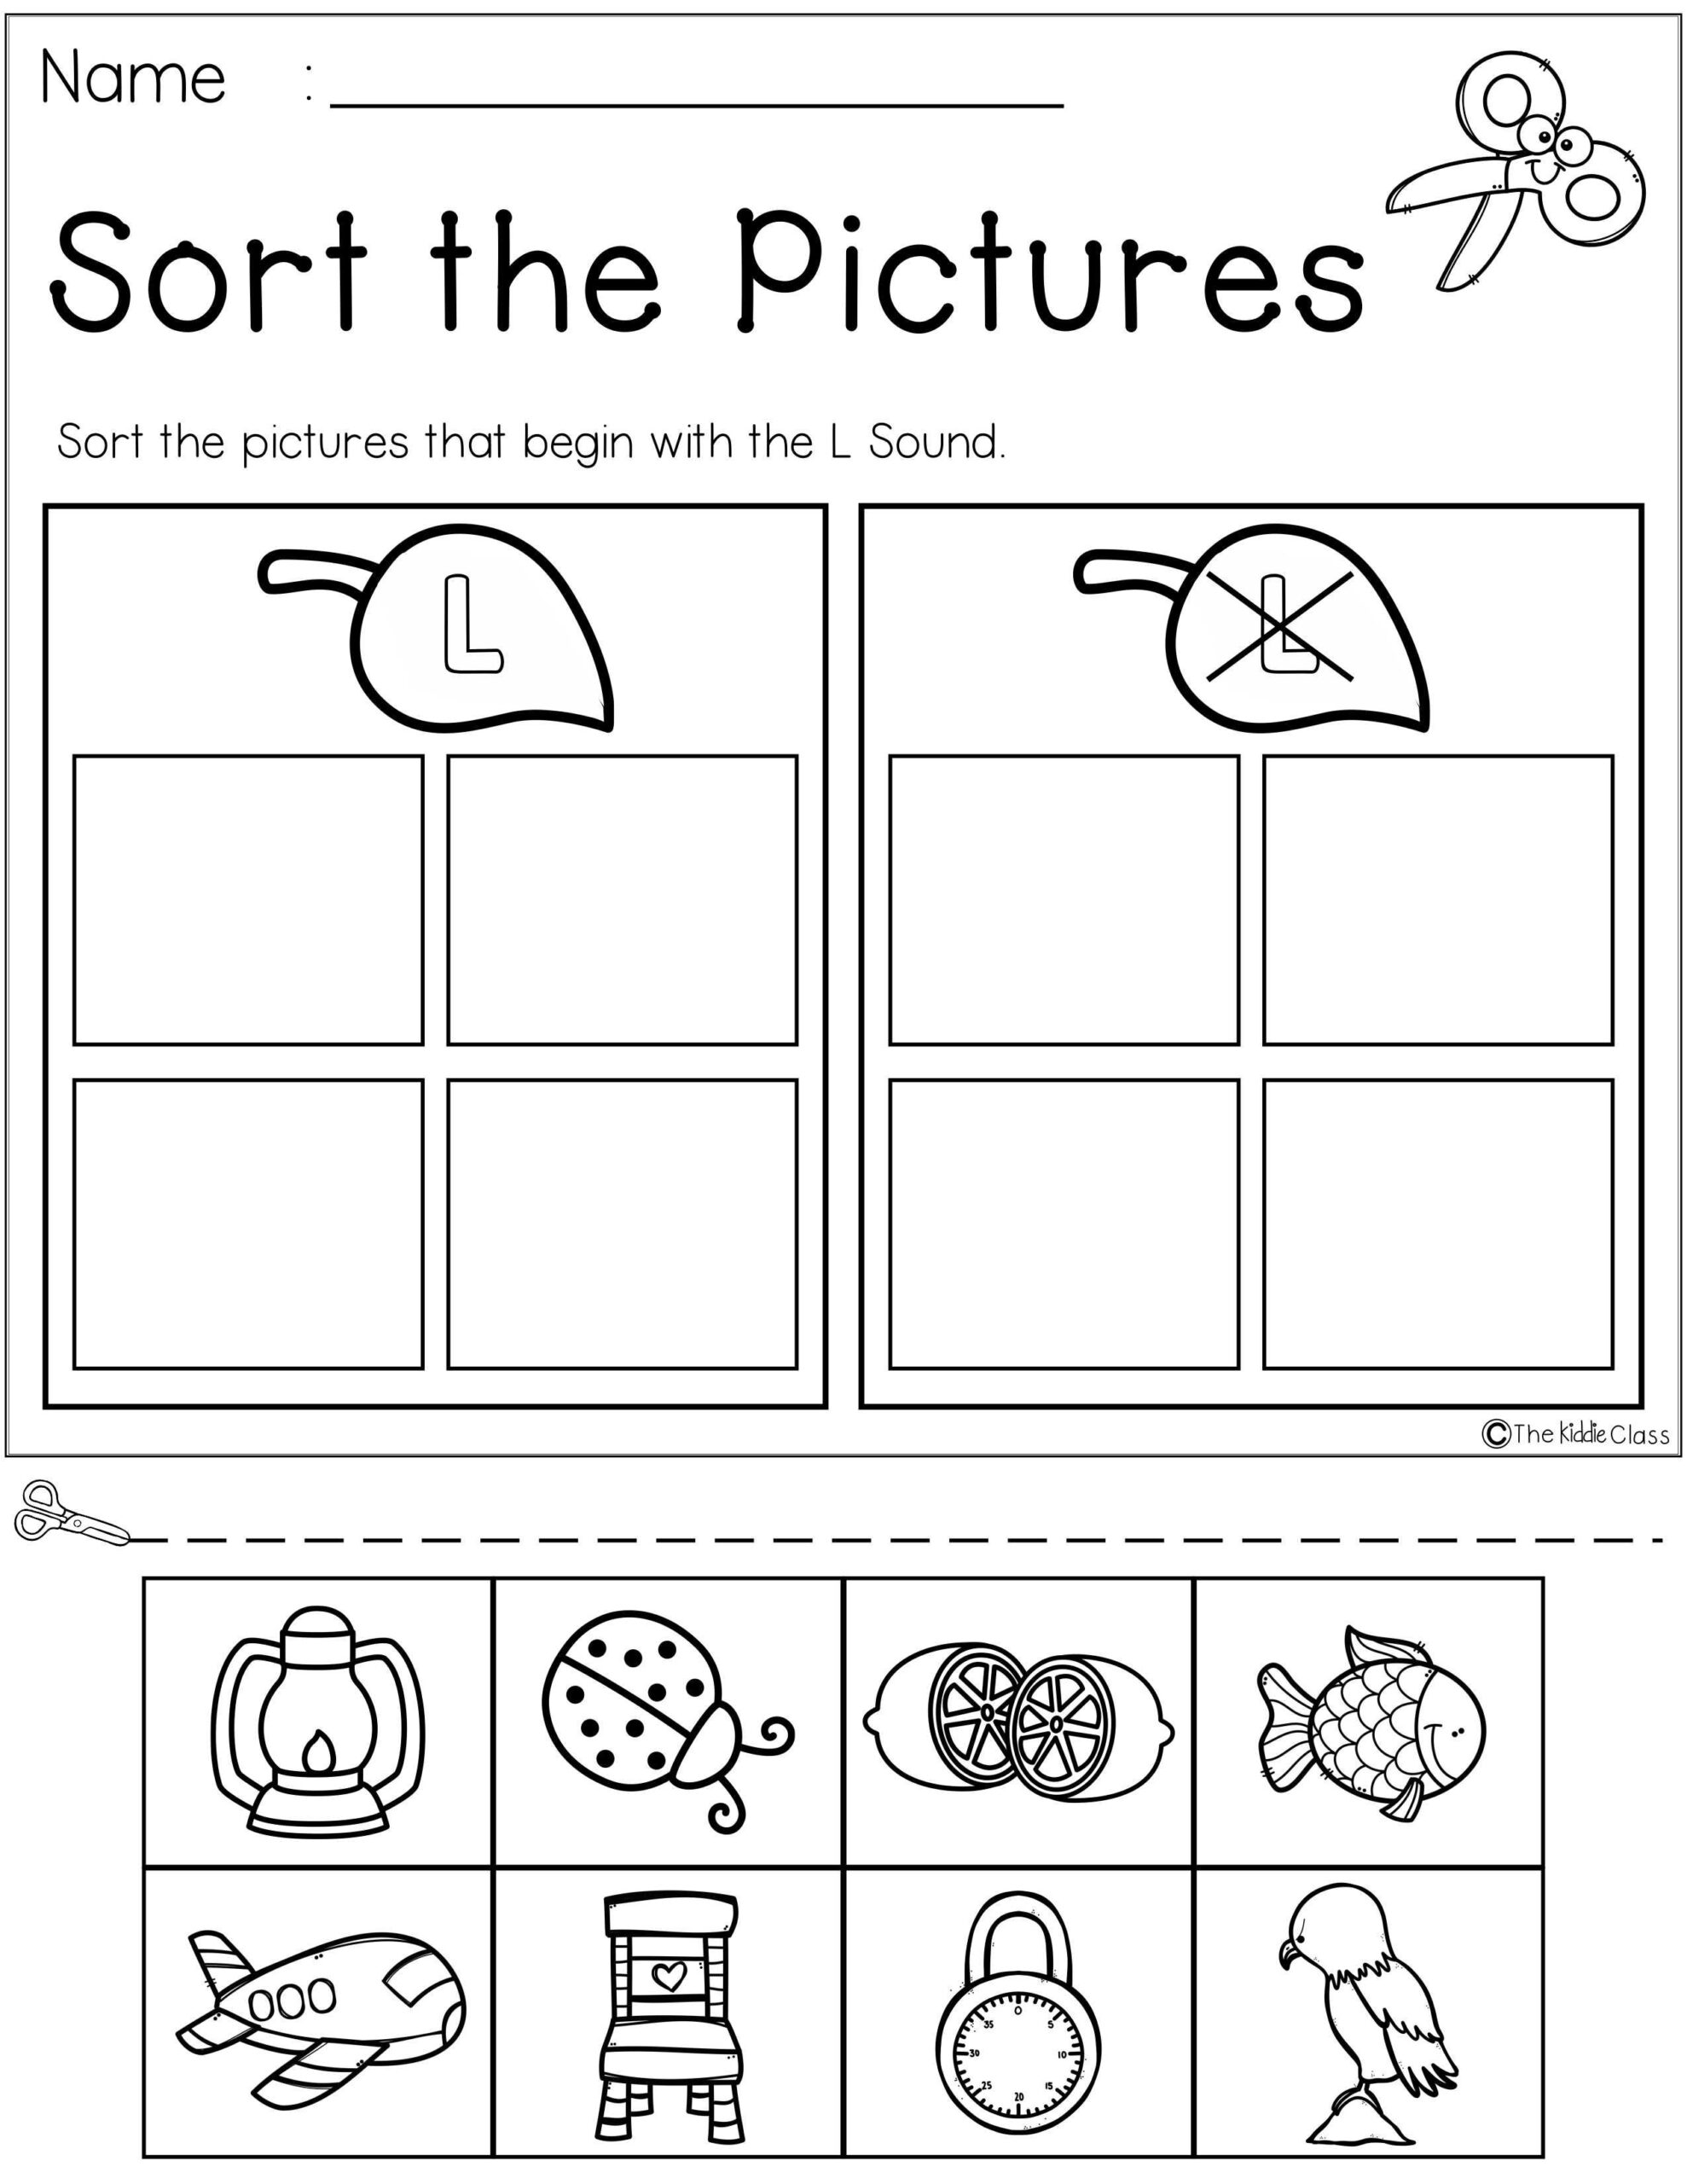 english-for-kids-step-by-step-letter-l-worksheets-flash-cards-coloring-pages